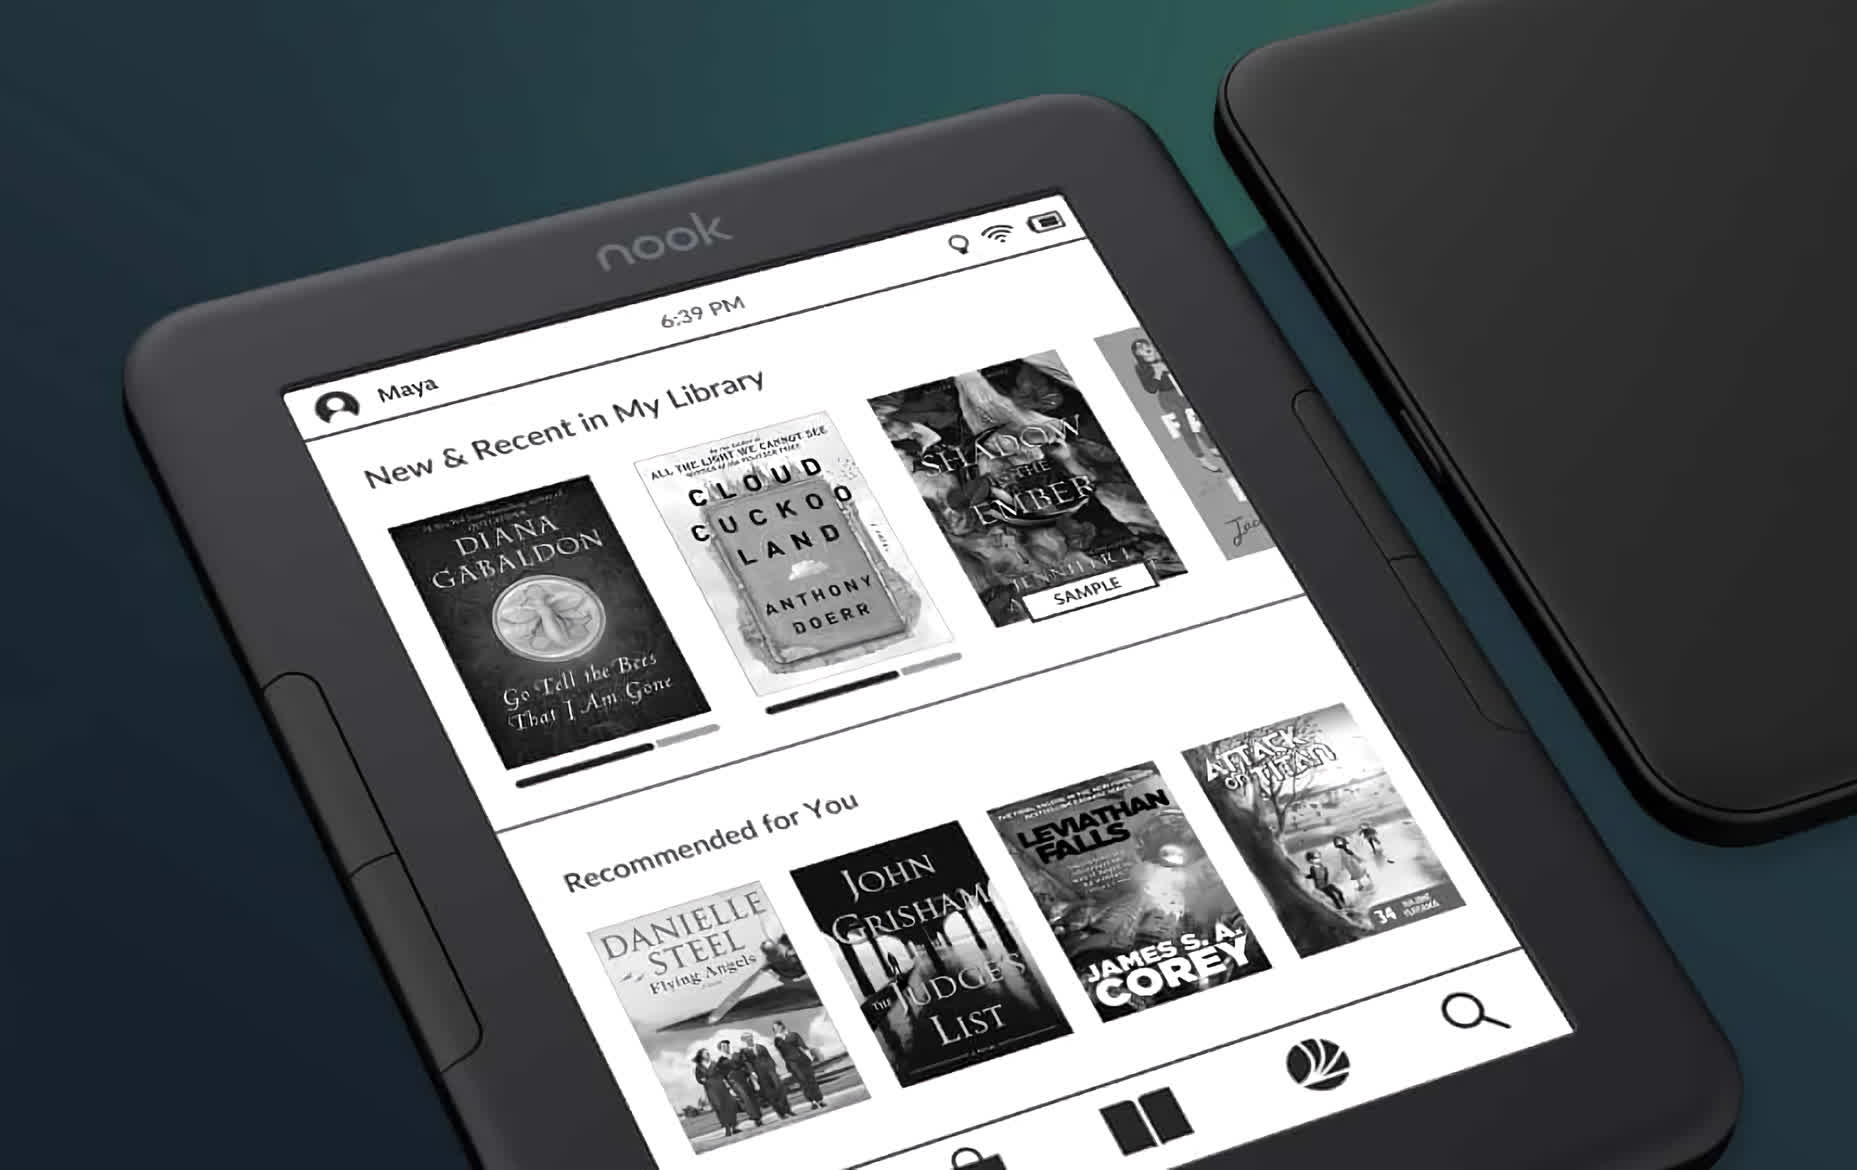 Barnes & Noble announces the GlowLight 4, its second Nook device this year